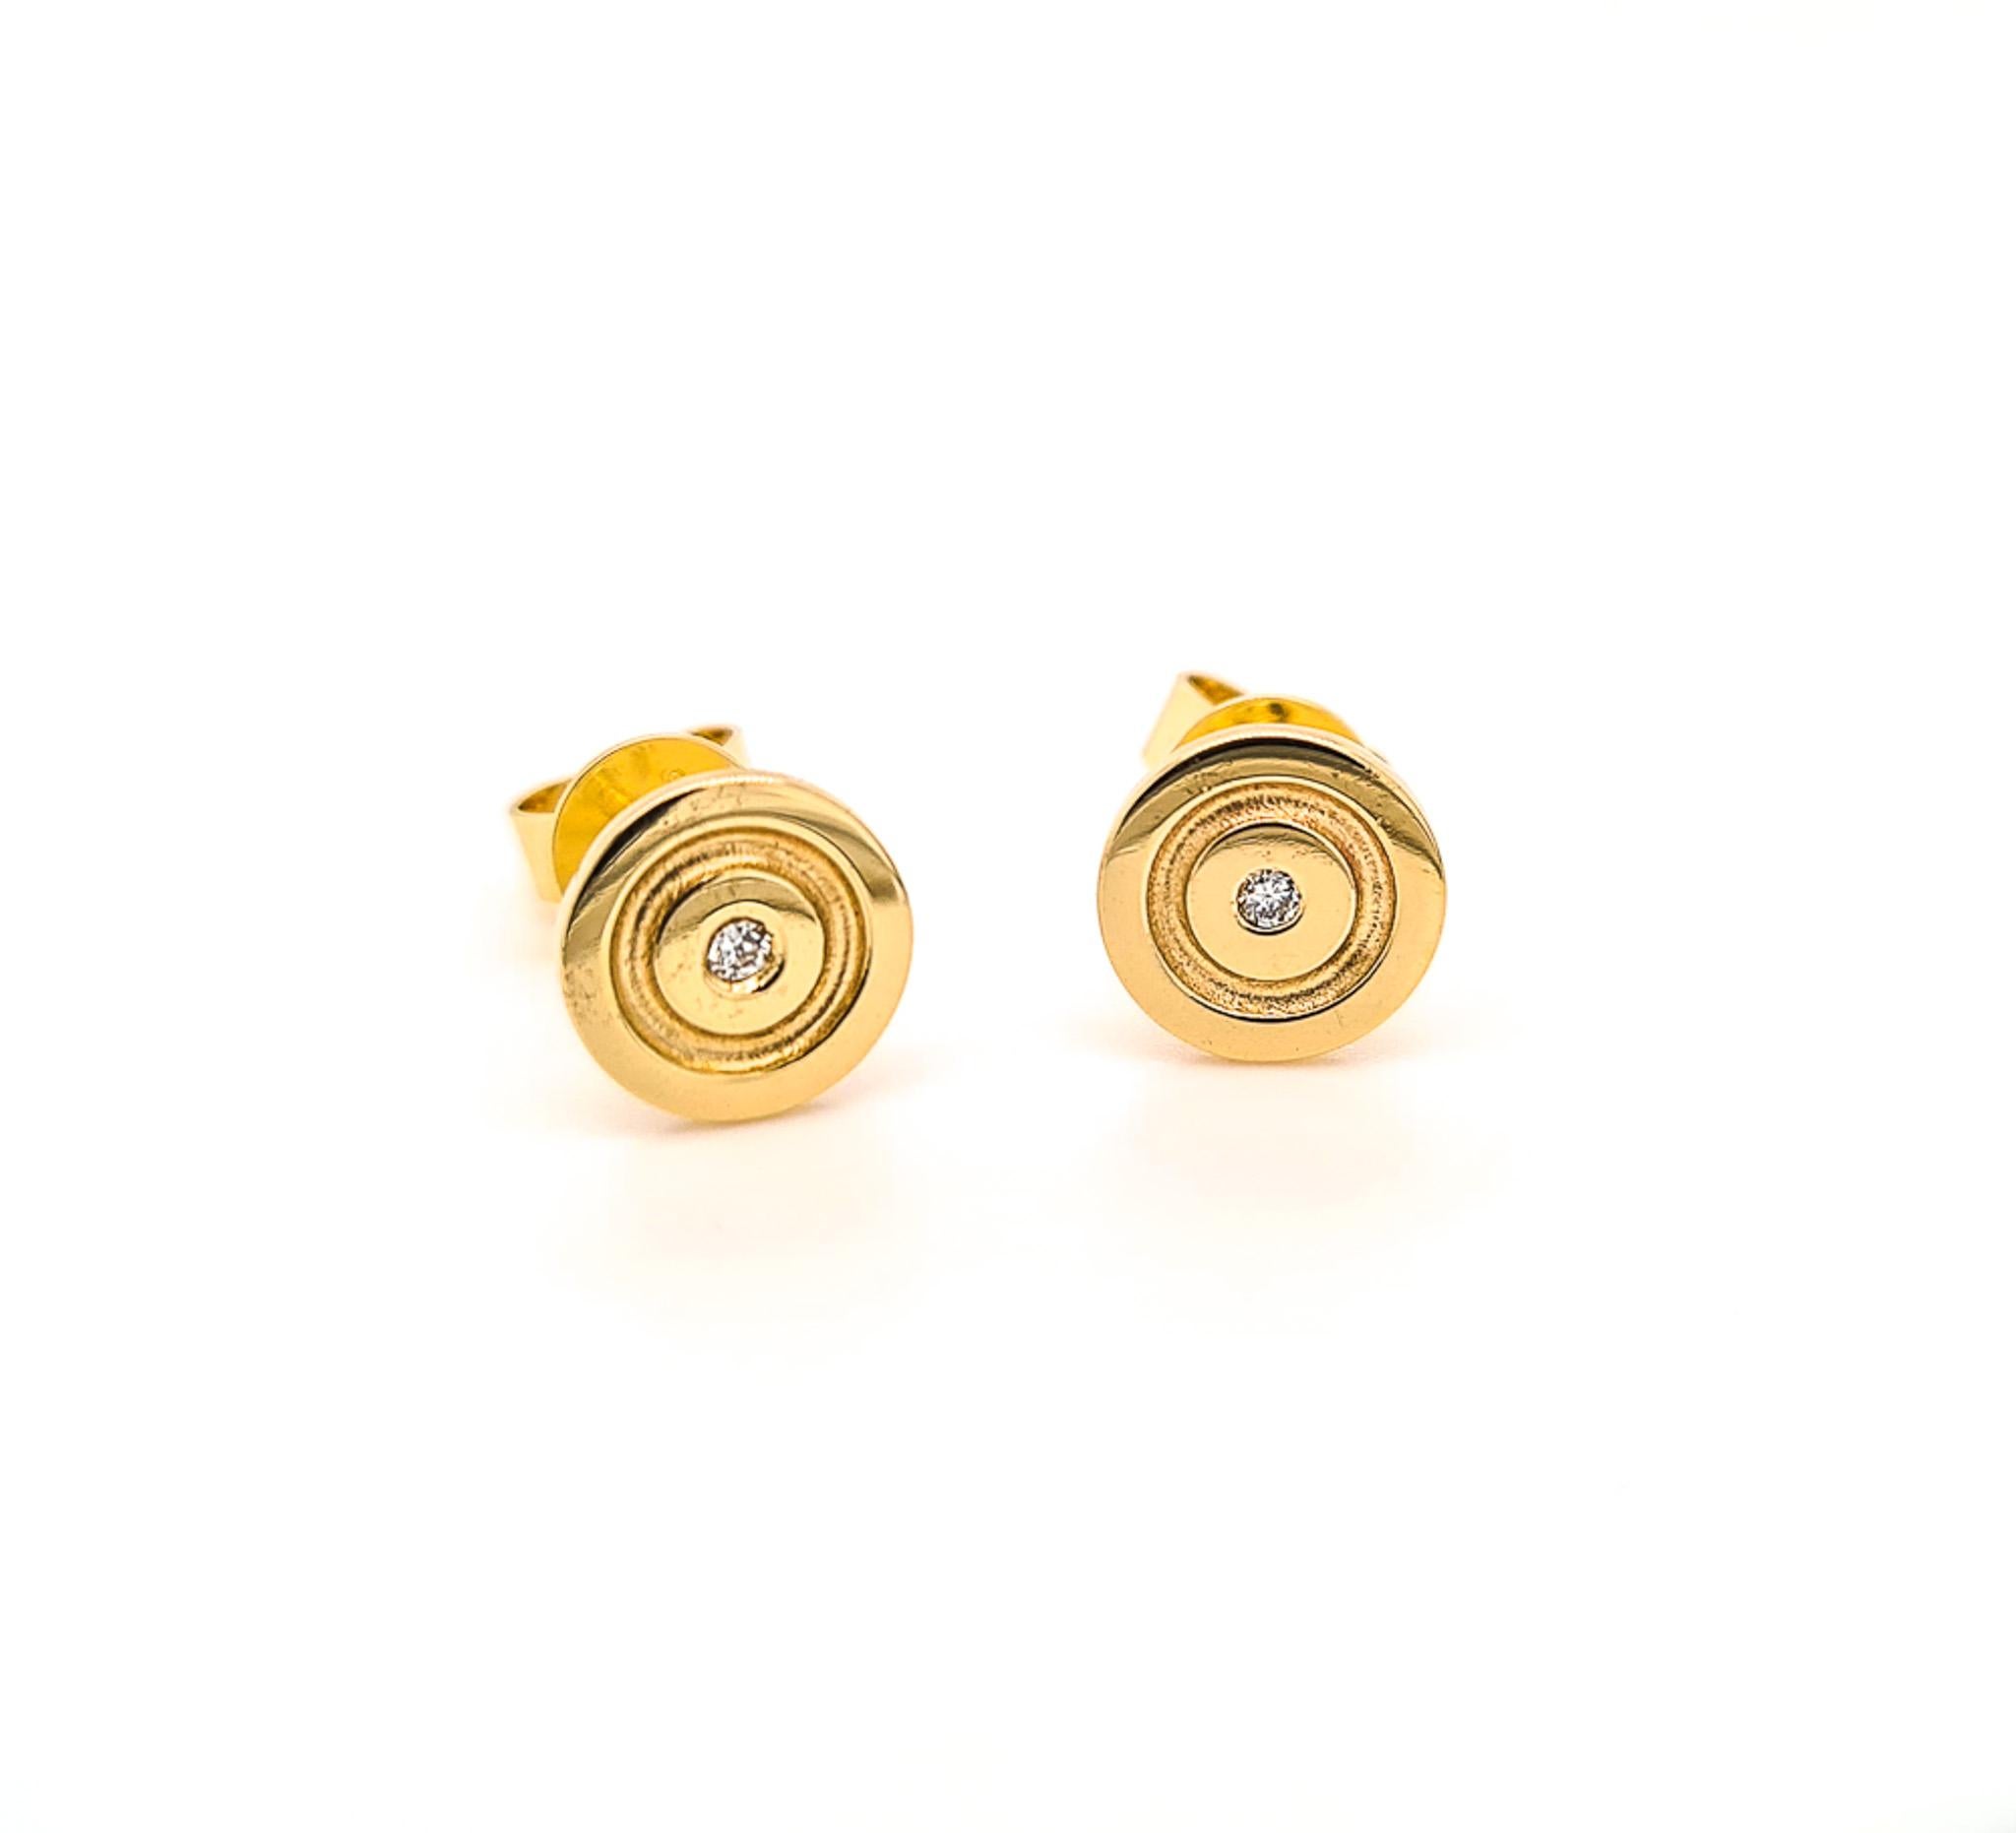 These Stunning 18ct yellow gold 